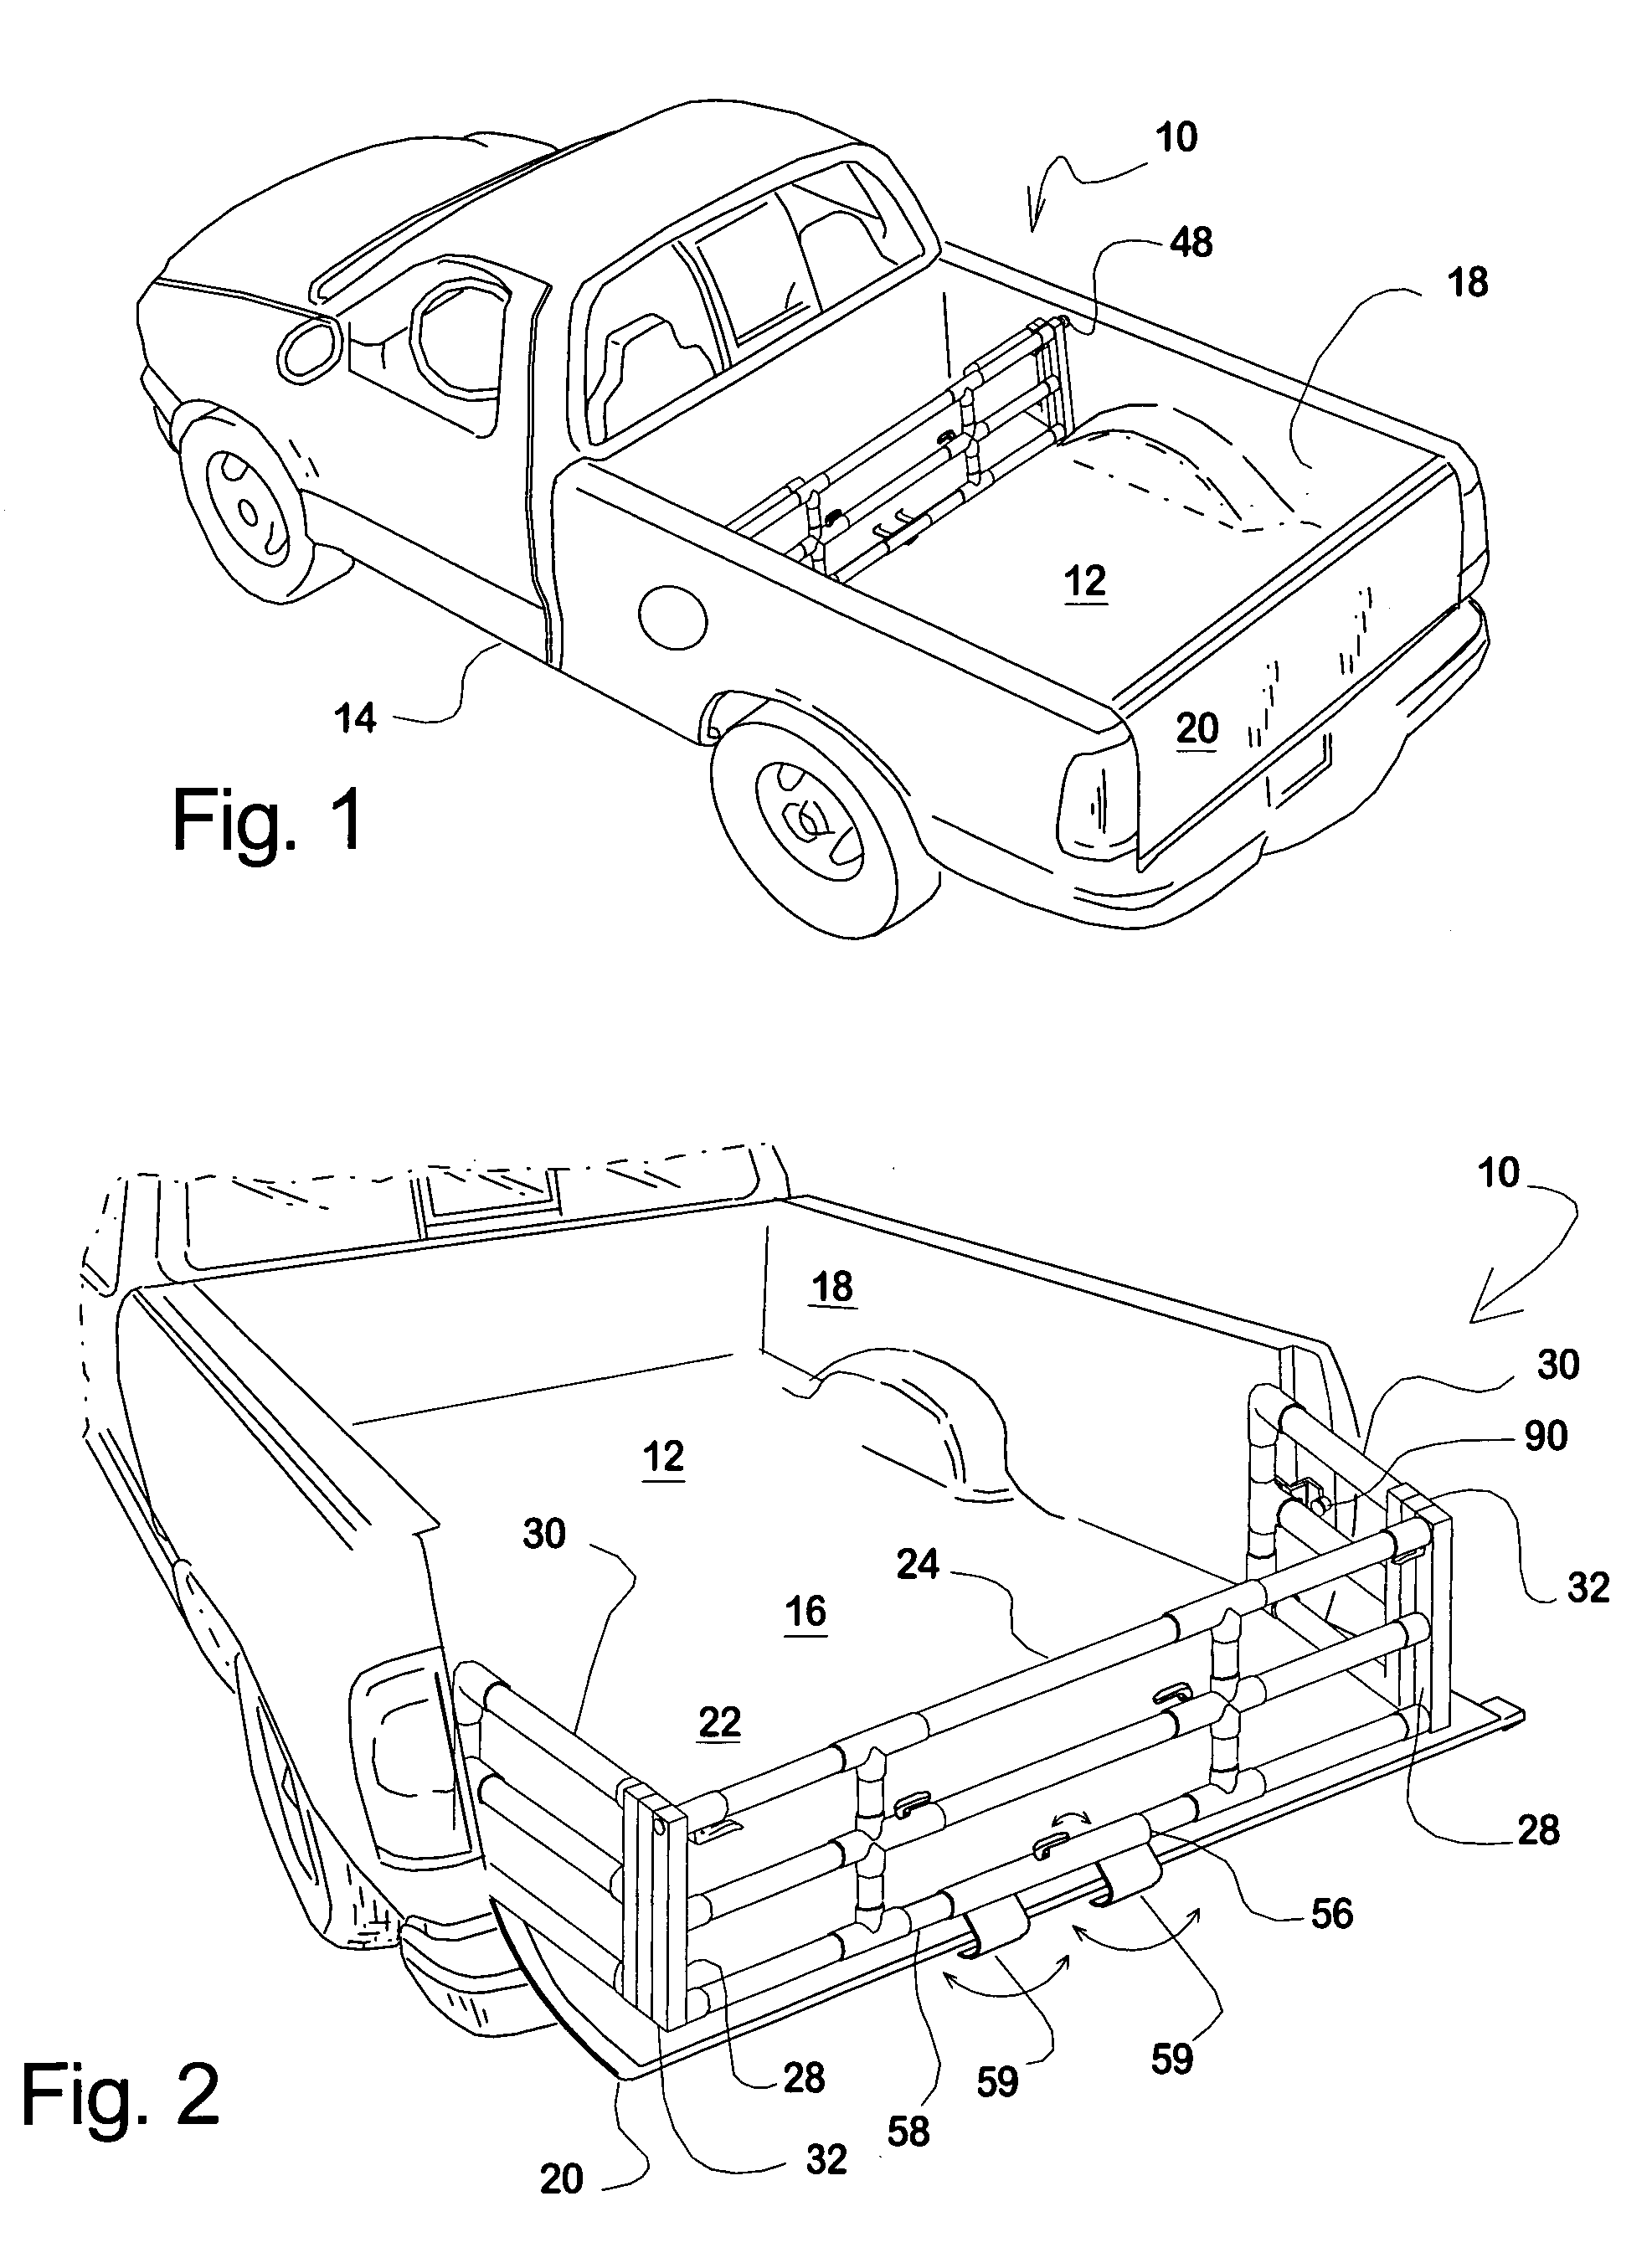 Truck bed extender and cargo gate